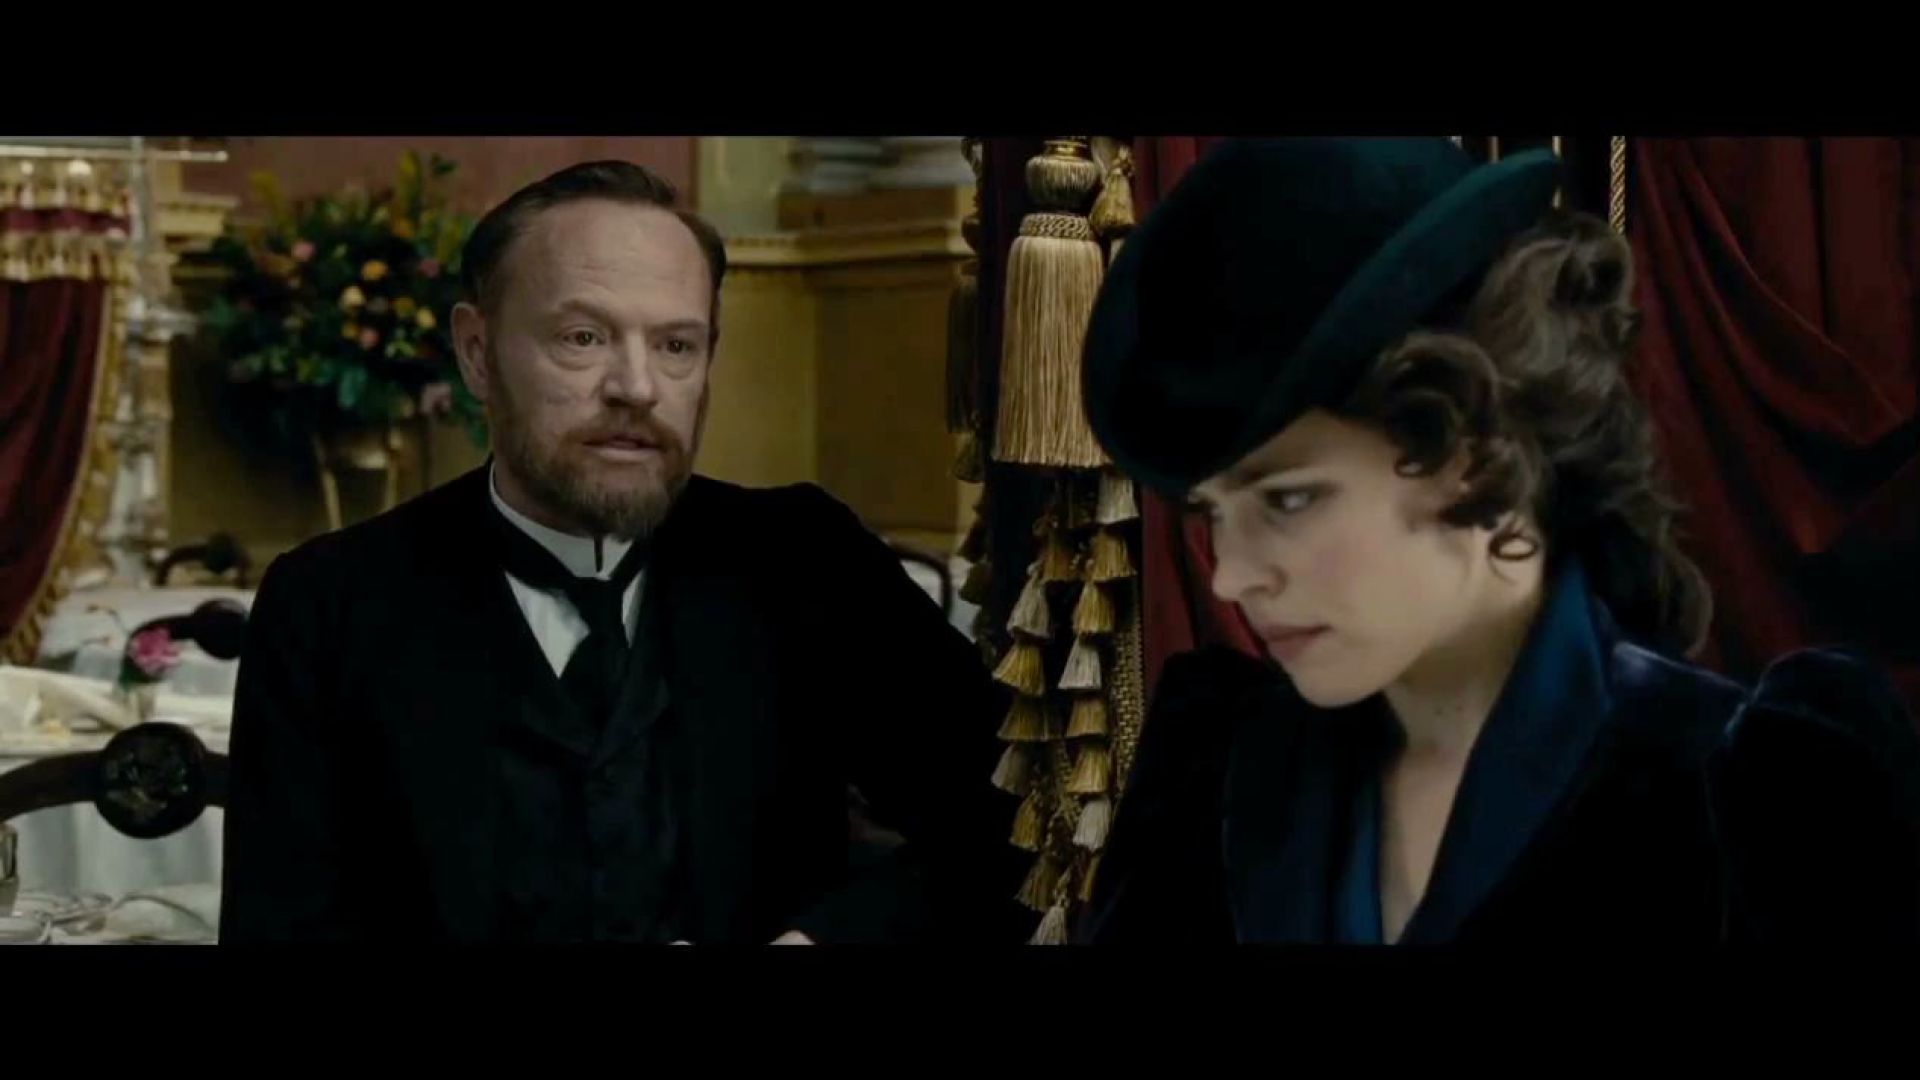 Professor Moriarty talks to Irene Adler about his plans in Sherlock Holmes 2